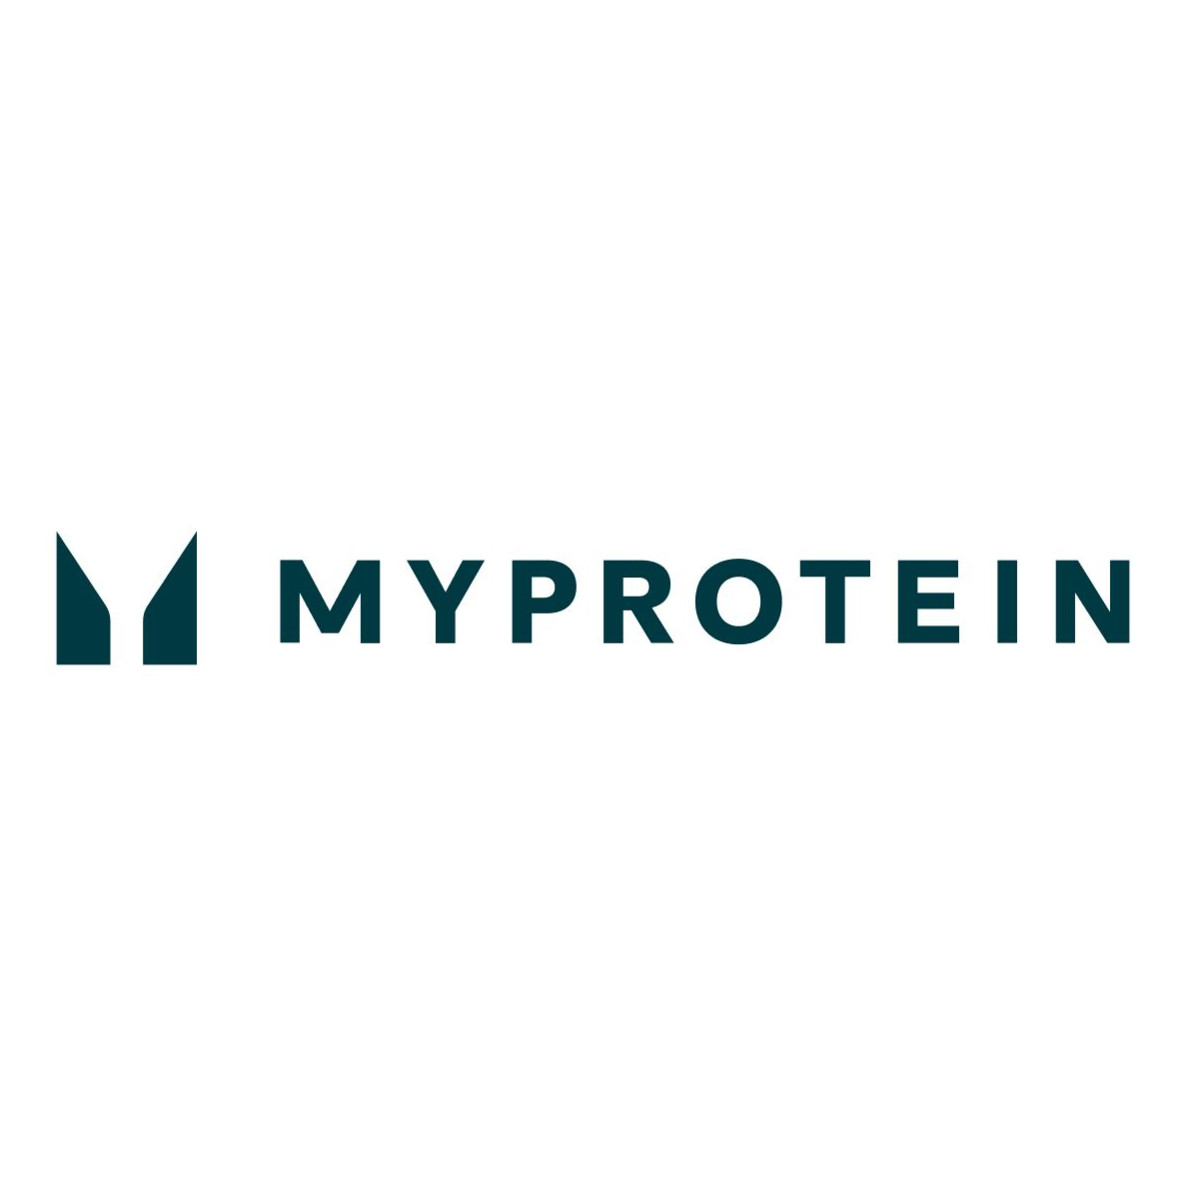 Myprotein.com Spring Cleaning Deal Up to 50% offf $97.99